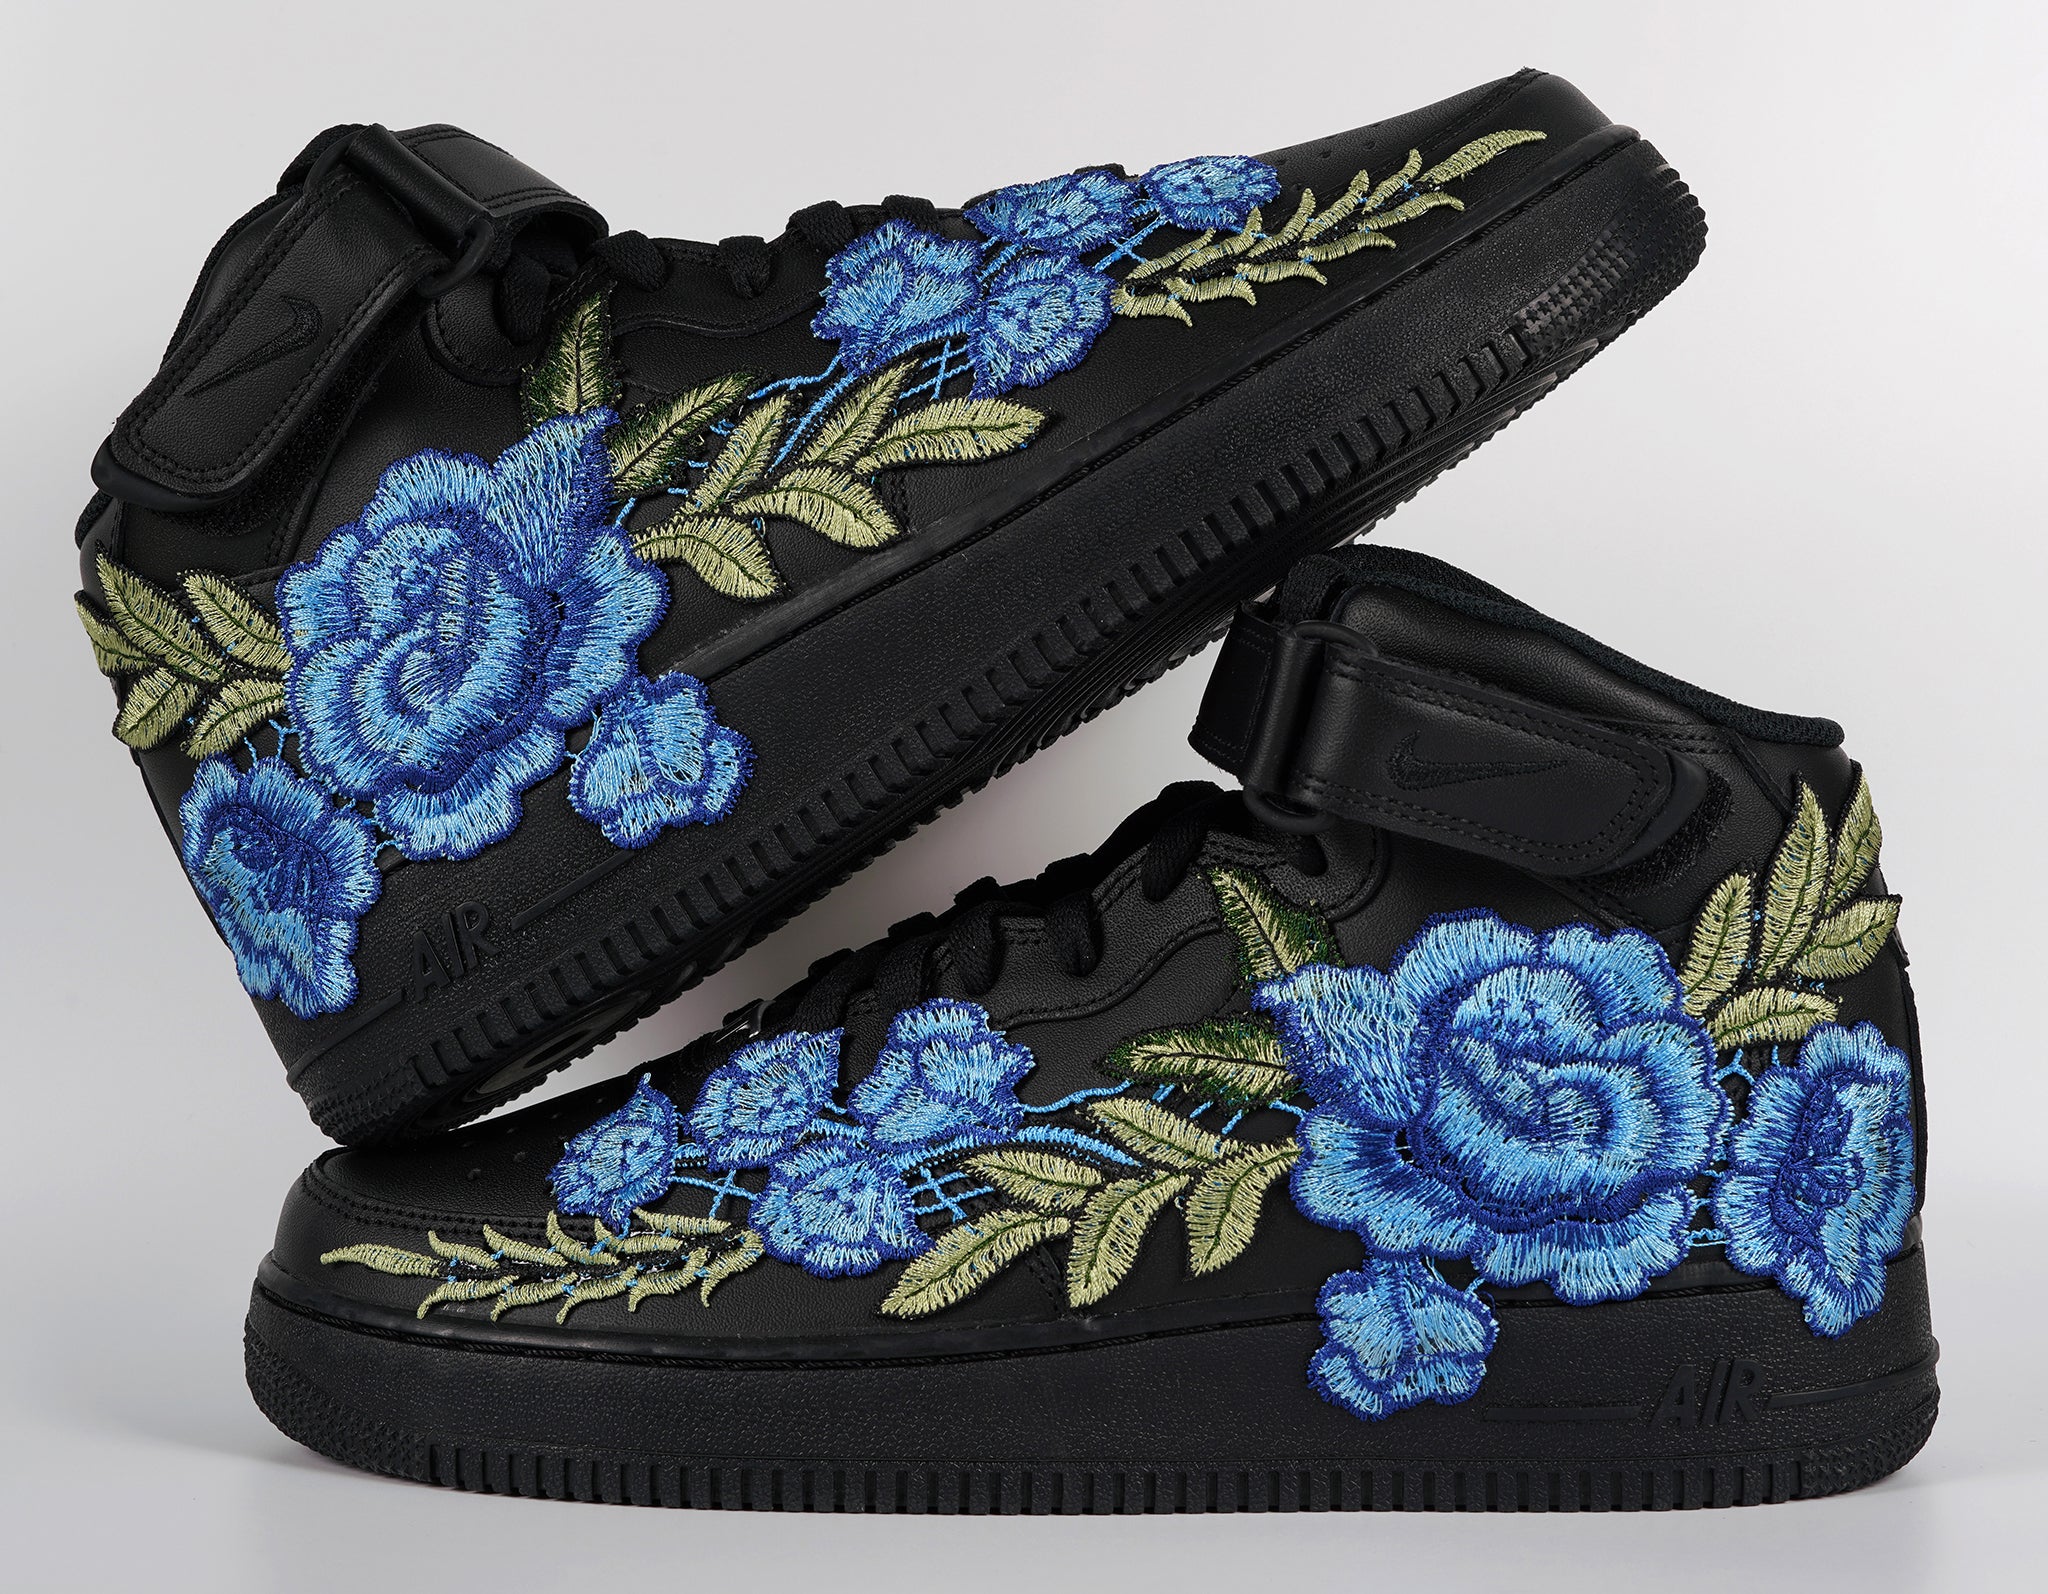 Nike Air Force 1 Custom Mid Blue Rose Shoes Flower Floral Black All Sizes Men Women Kids Stacked